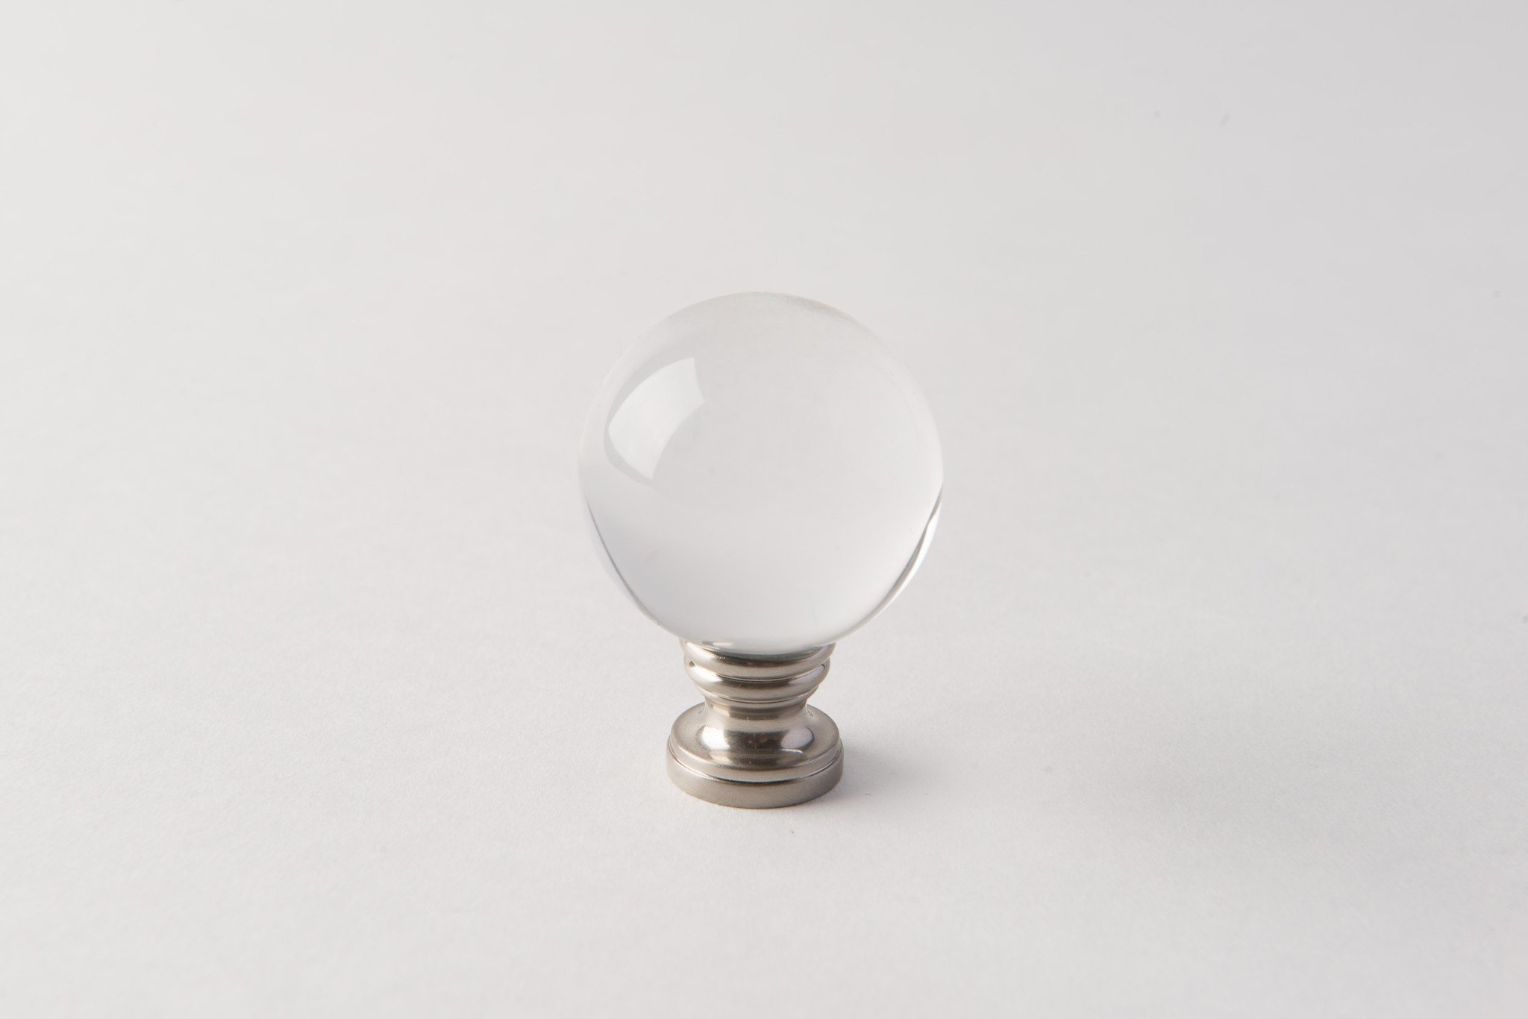 https://www.hotel-lamps.com/resources/assets/images/product_images/1599814018.Brushed Nickel_Crystal Ball 40mm.jpg